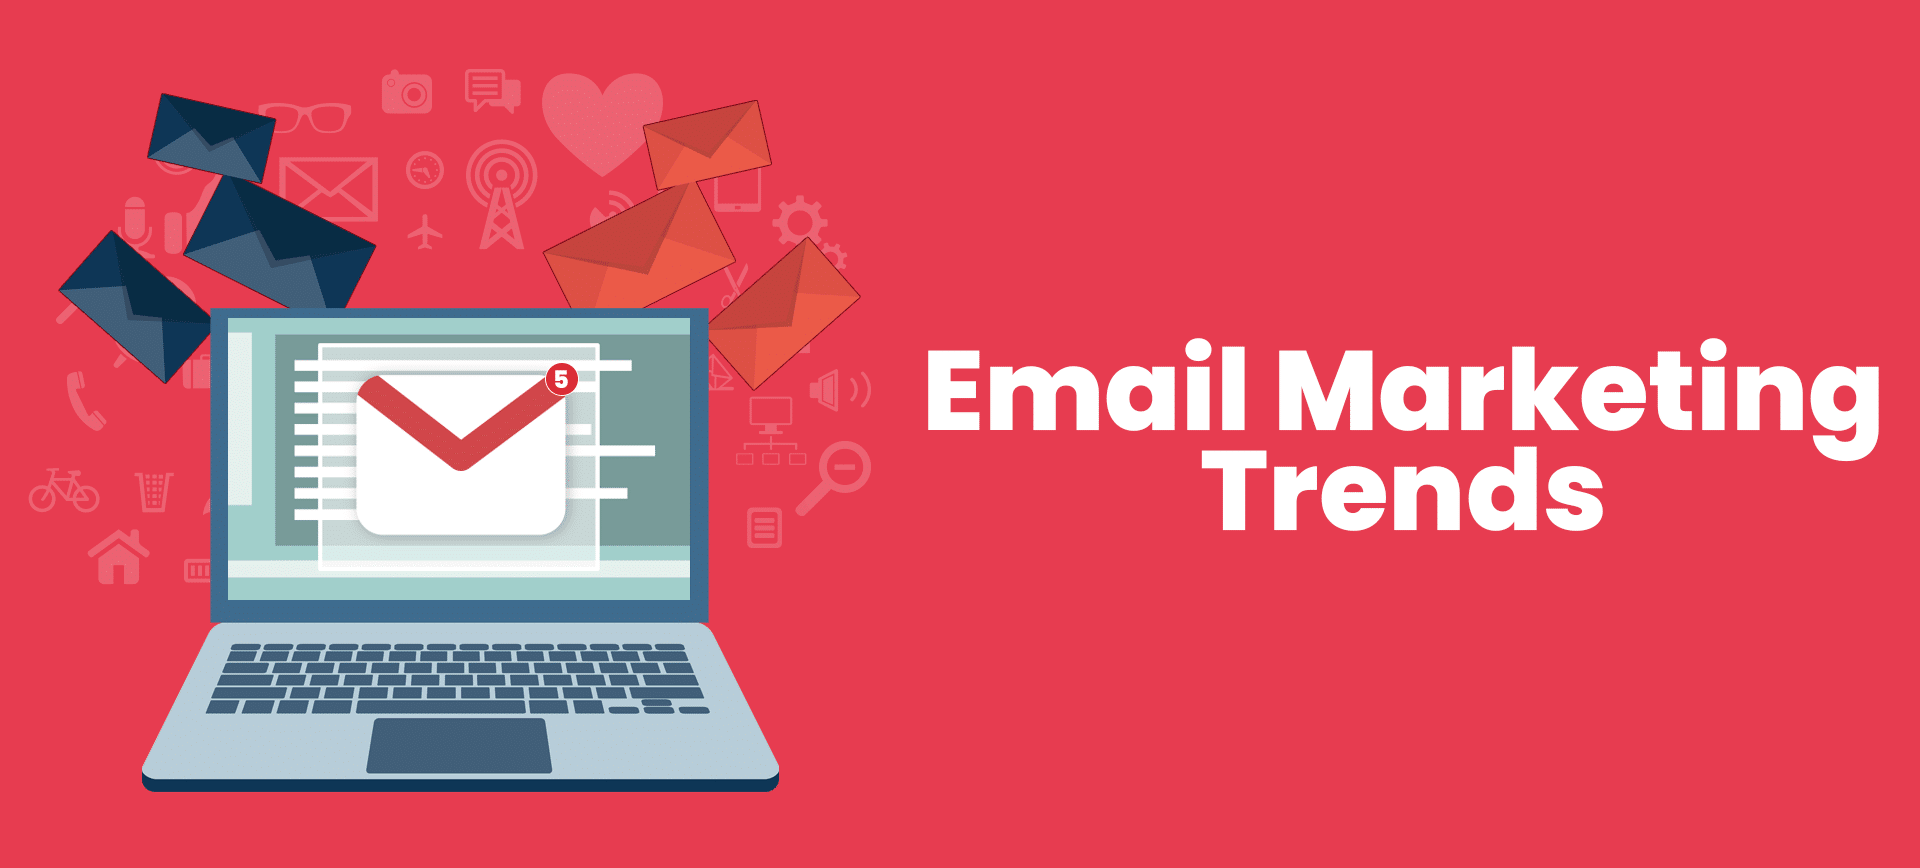 2 New Email Marketing Trends That Will Gain Popularity In 2020 & Beyond